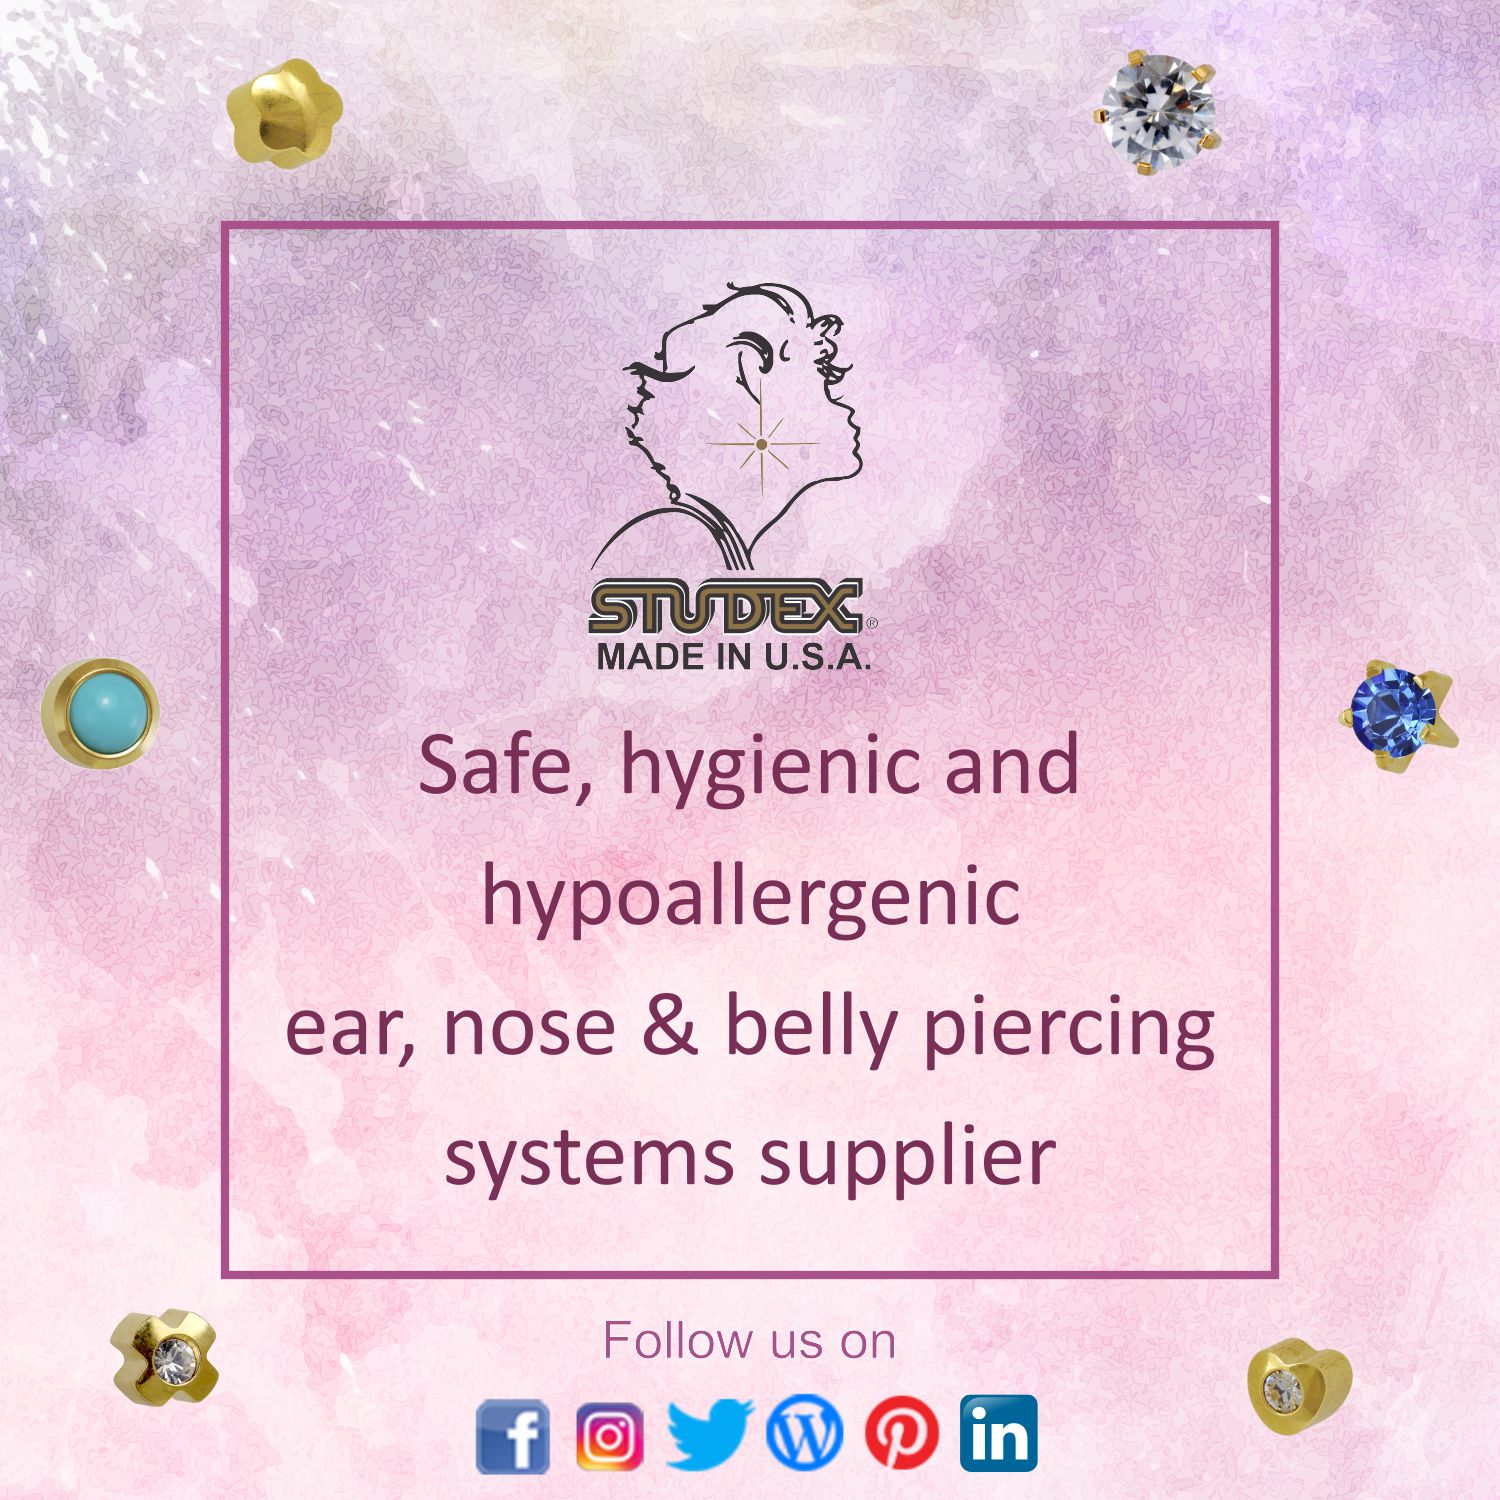 Safe, hygienic and hypoallergenic ear, nose and belly piercing systems supplier helps to support your piercing business. Contact us at 022 40243611/2.  #studexearpiercing #studexasia #contactus #mailus #callusnow #likeforfollow #followusnow #betrendy #bestudex